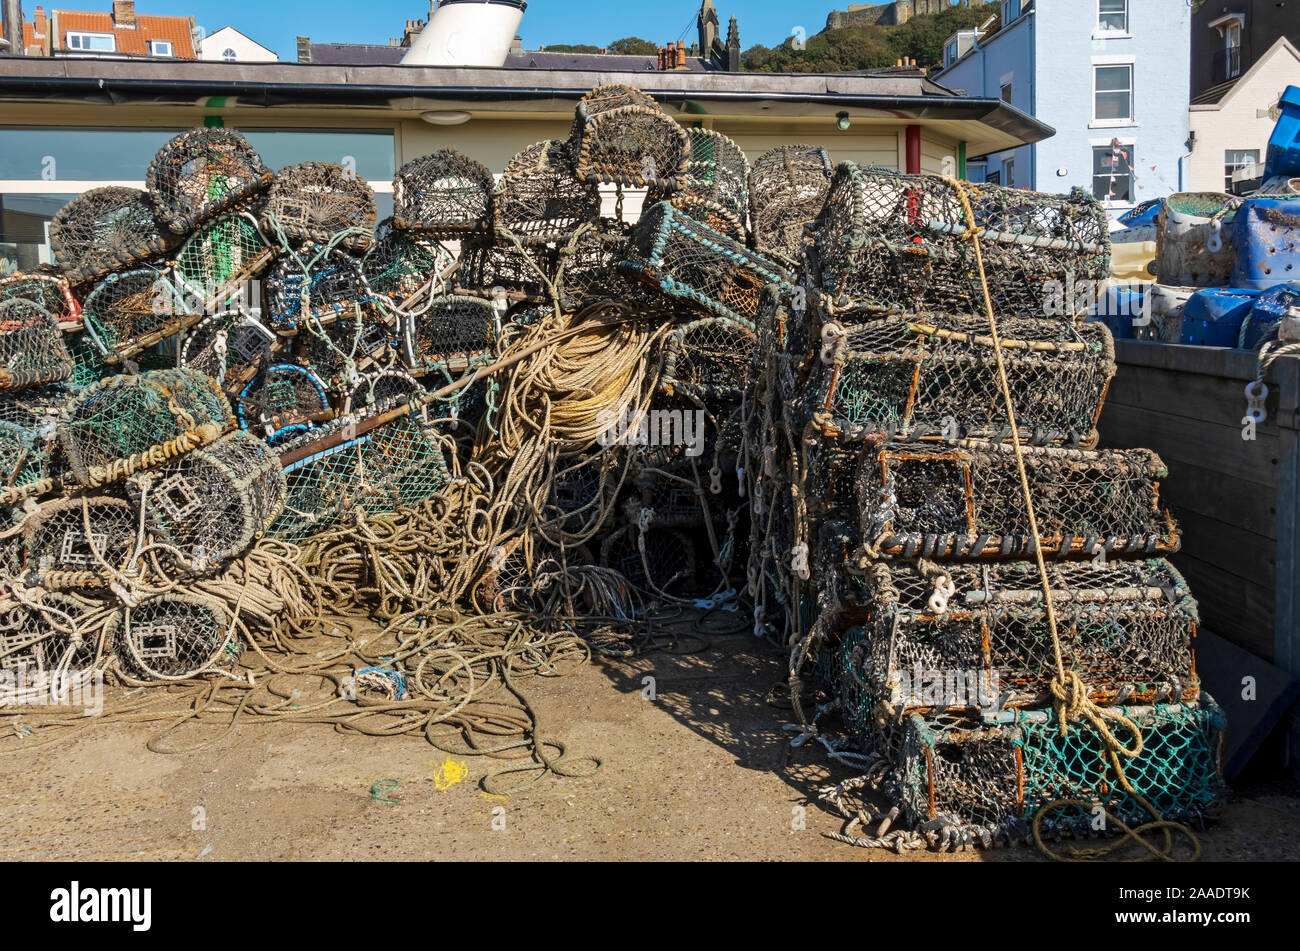 Stacks of lobster and crab pots pot sea fishing industry on the quayside Scarborough North Yorkshire England UK United Kingdom GB Great Britain Stock Photo